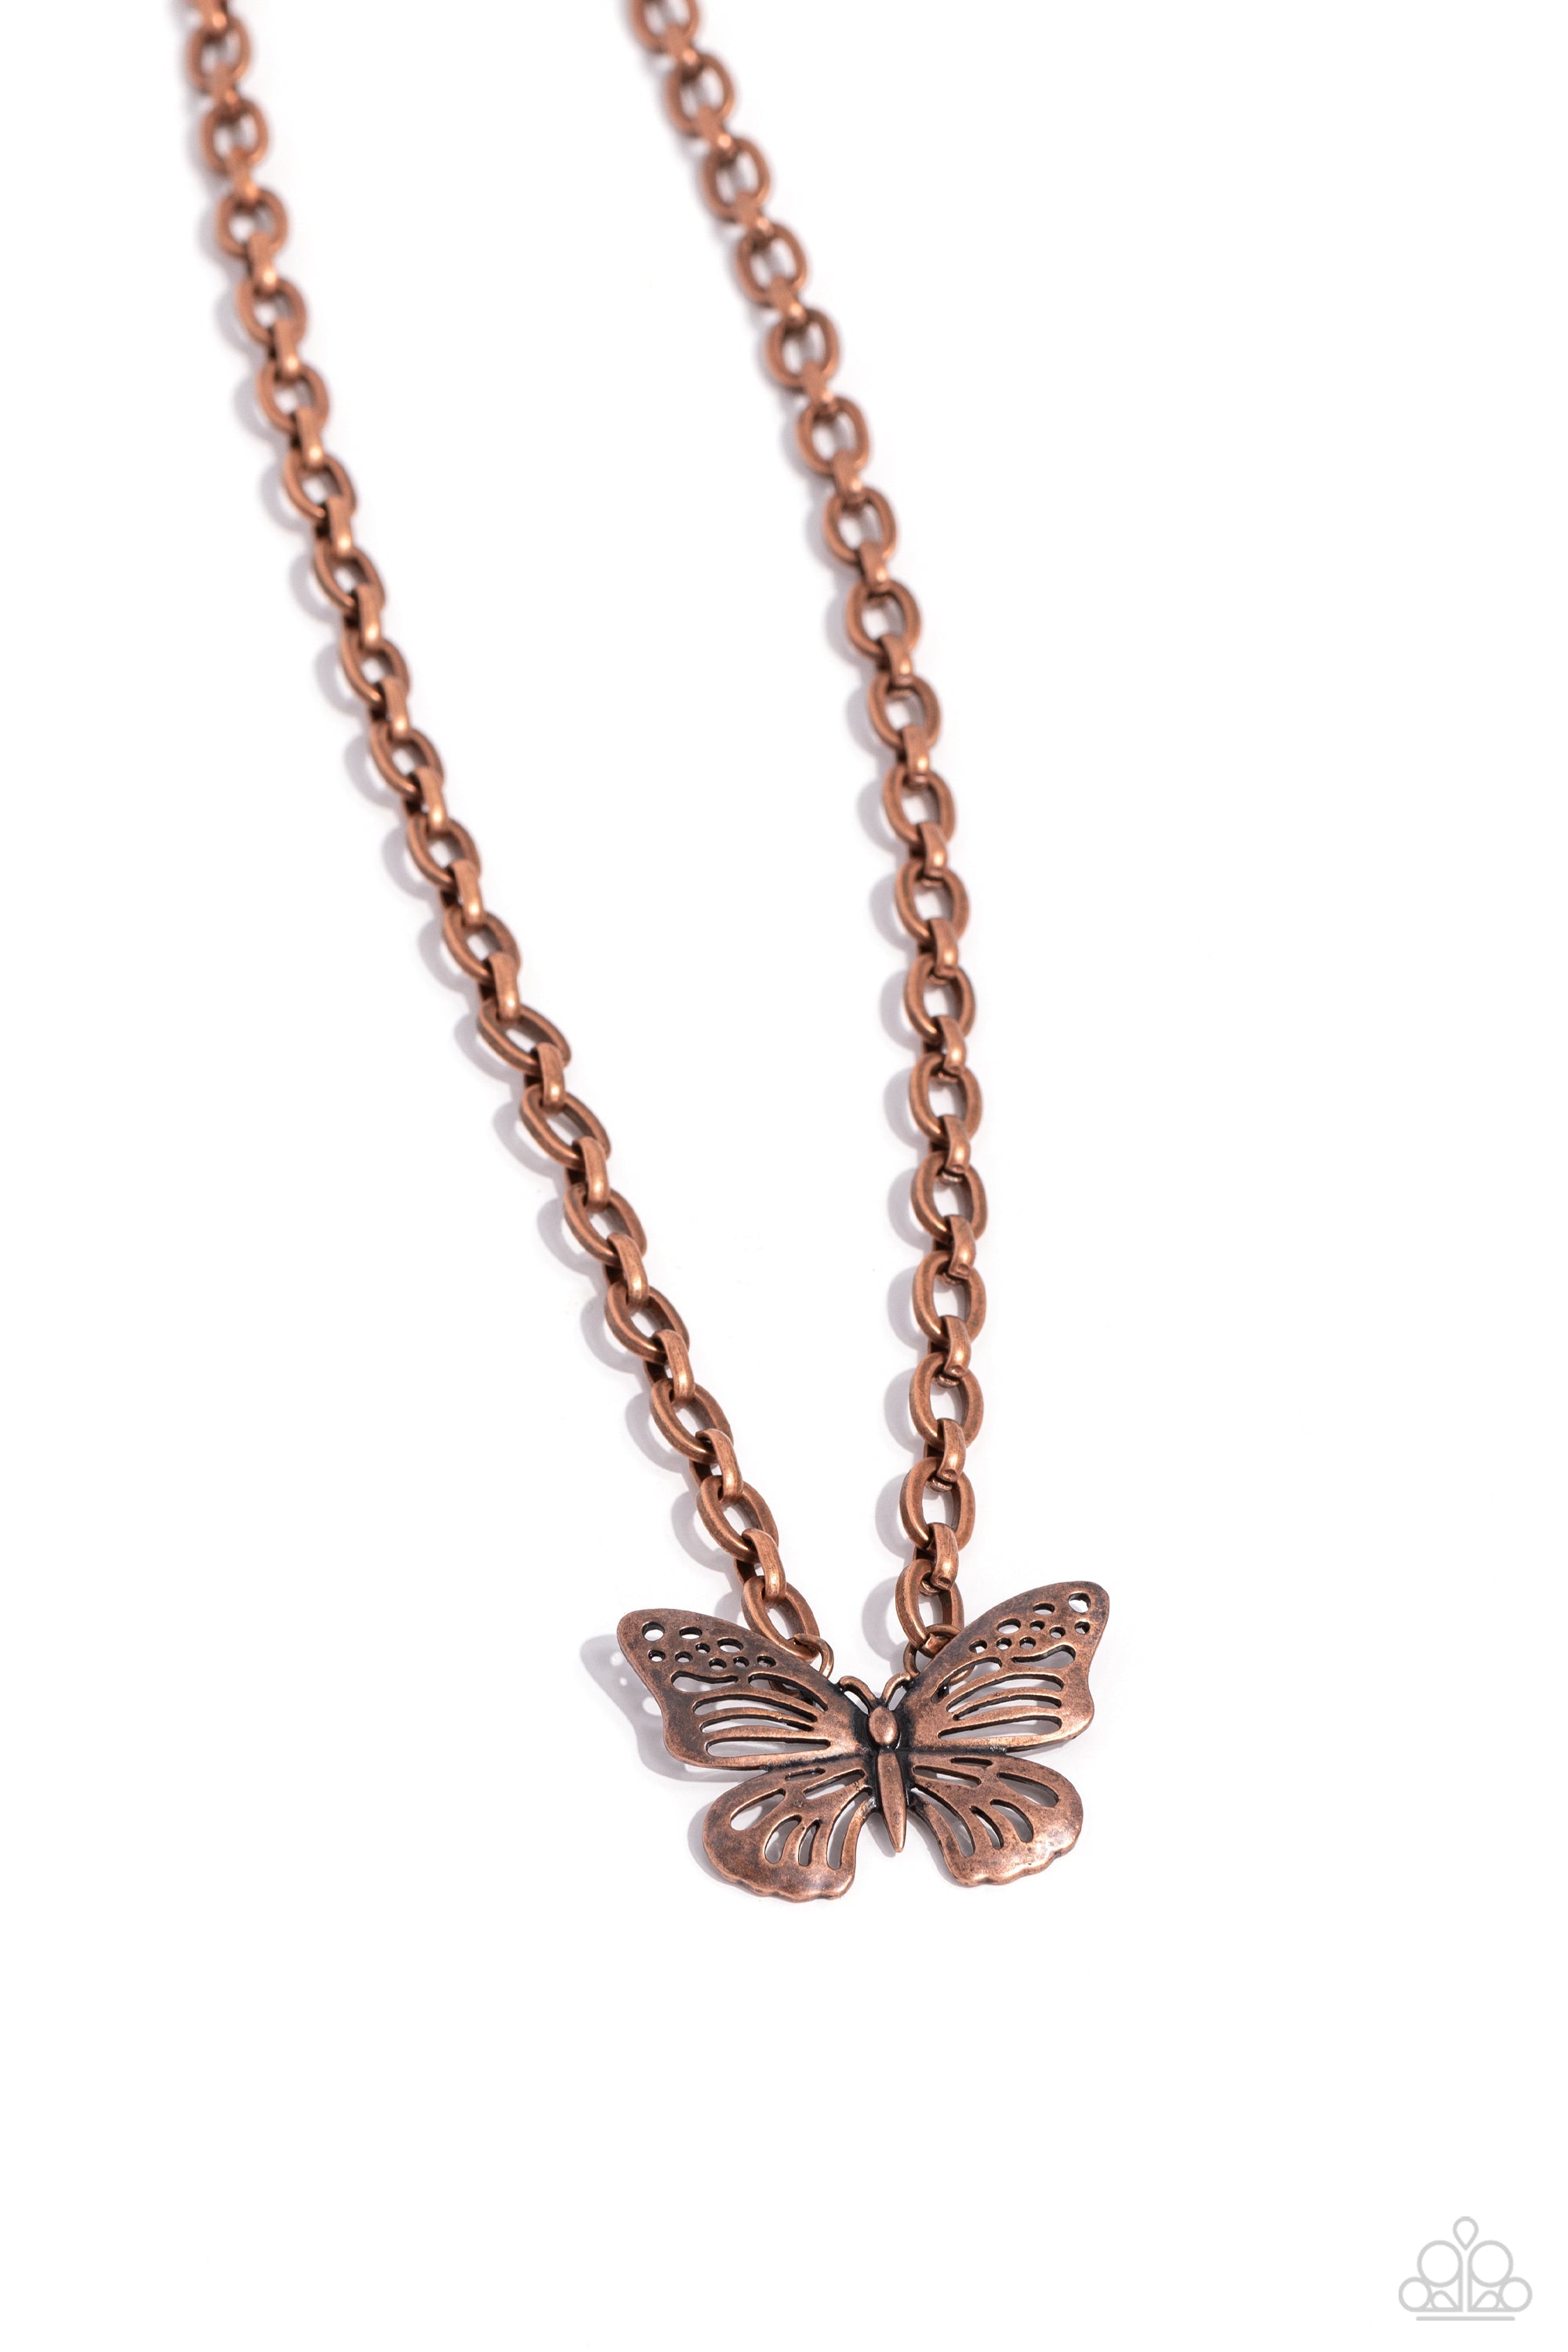 Midair Monochromatic Copper Butterfly Necklace - Paparazzi Accessories- lightbox - CarasShop.com - $5 Jewelry by Cara Jewels